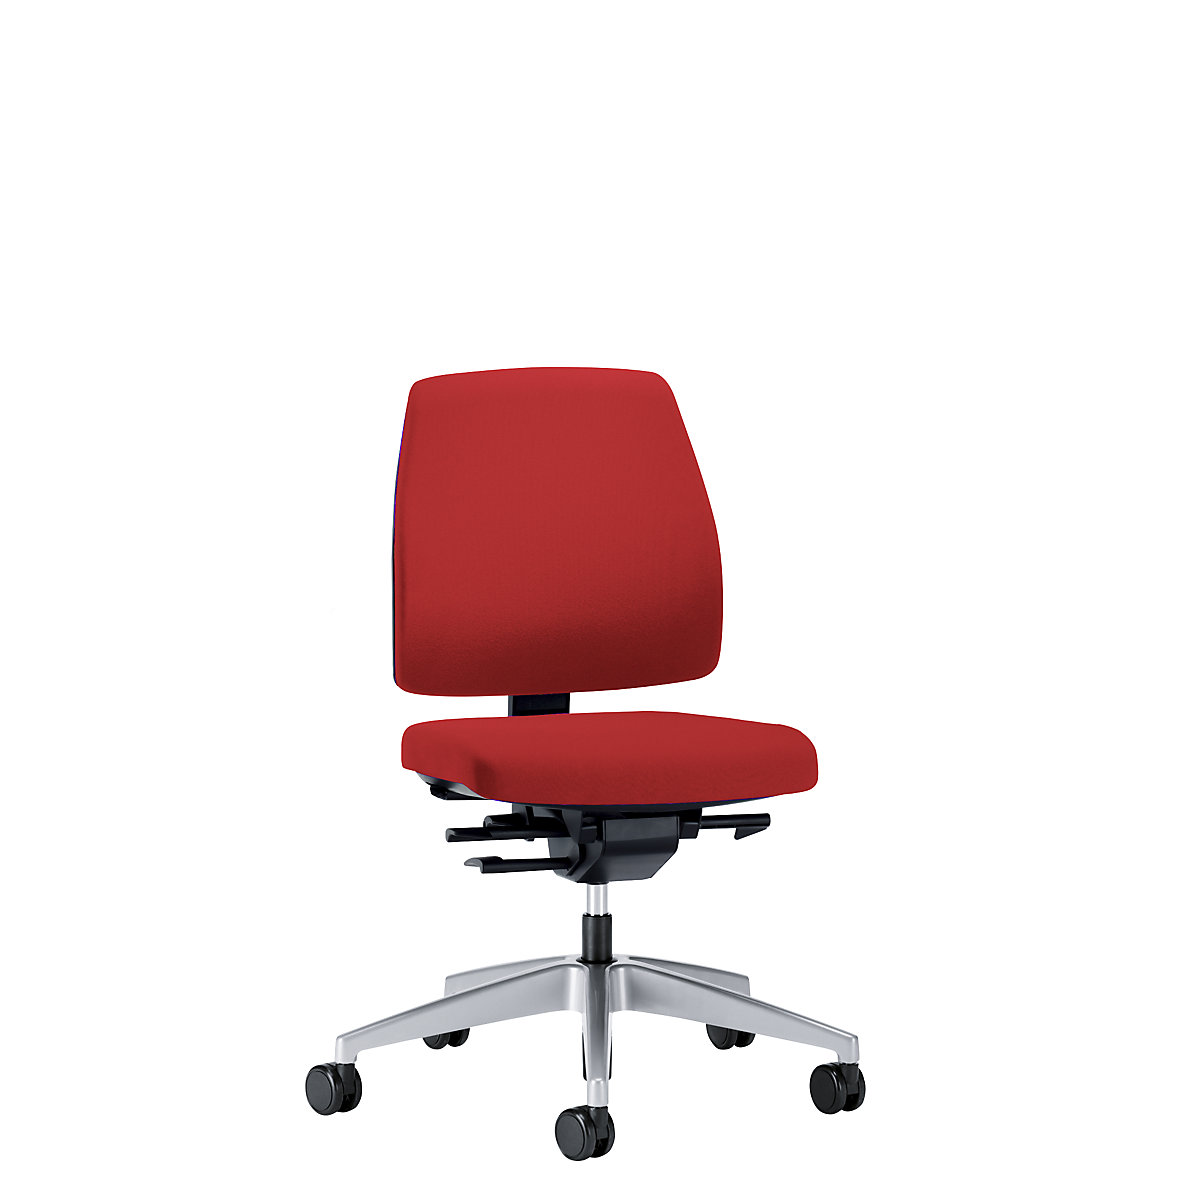 GOAL office swivel chair, back rest height 430 mm – interstuhl, brilliant silver frame, with hard castors, flame red, seat depth 410 mm-5